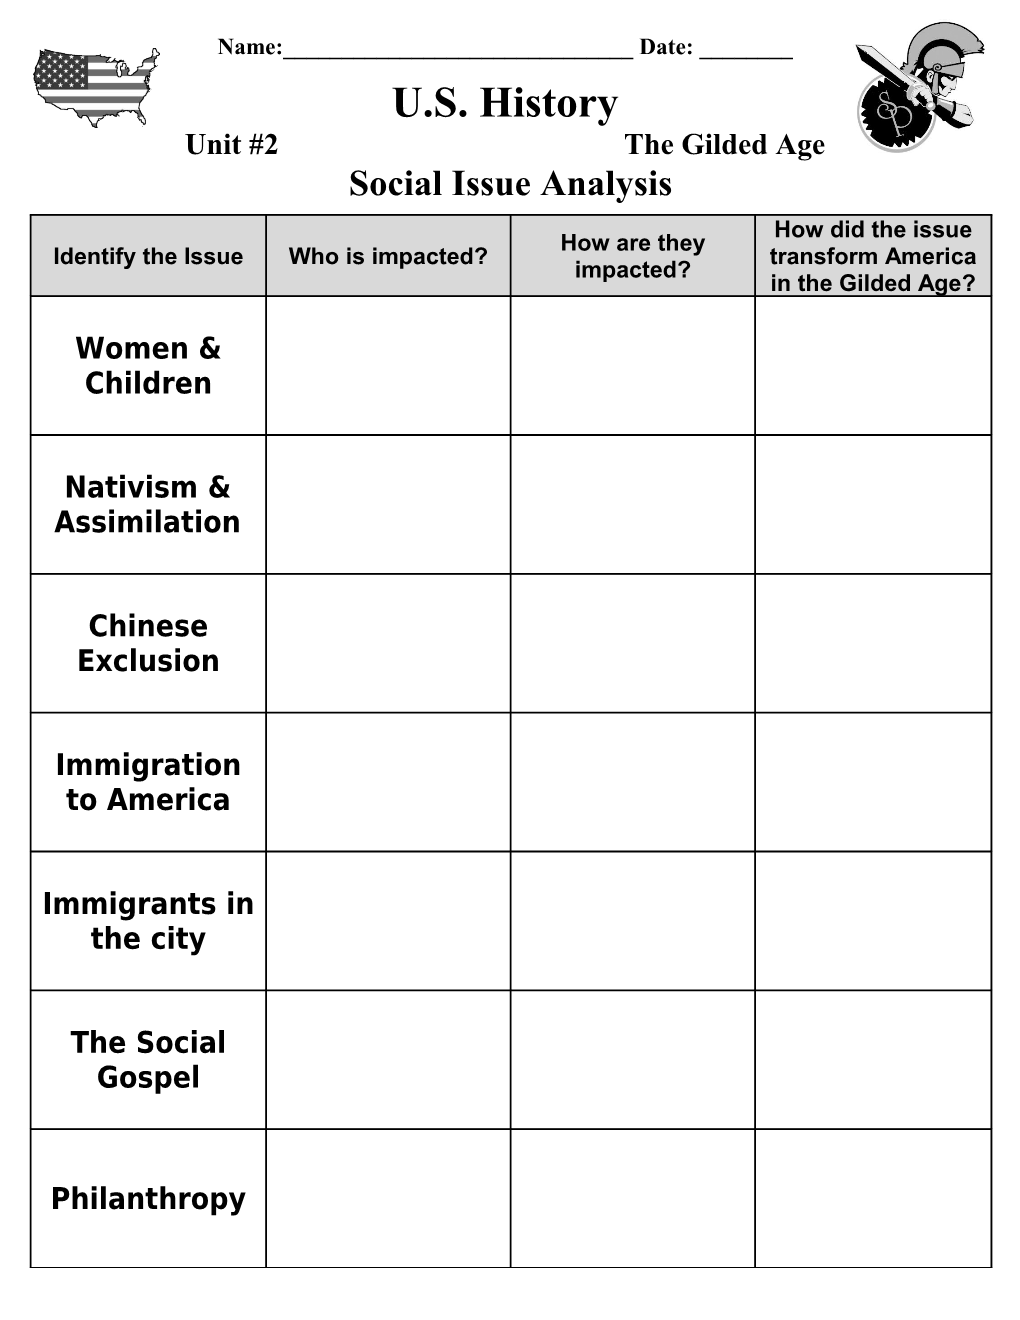 Social Issue Analysis